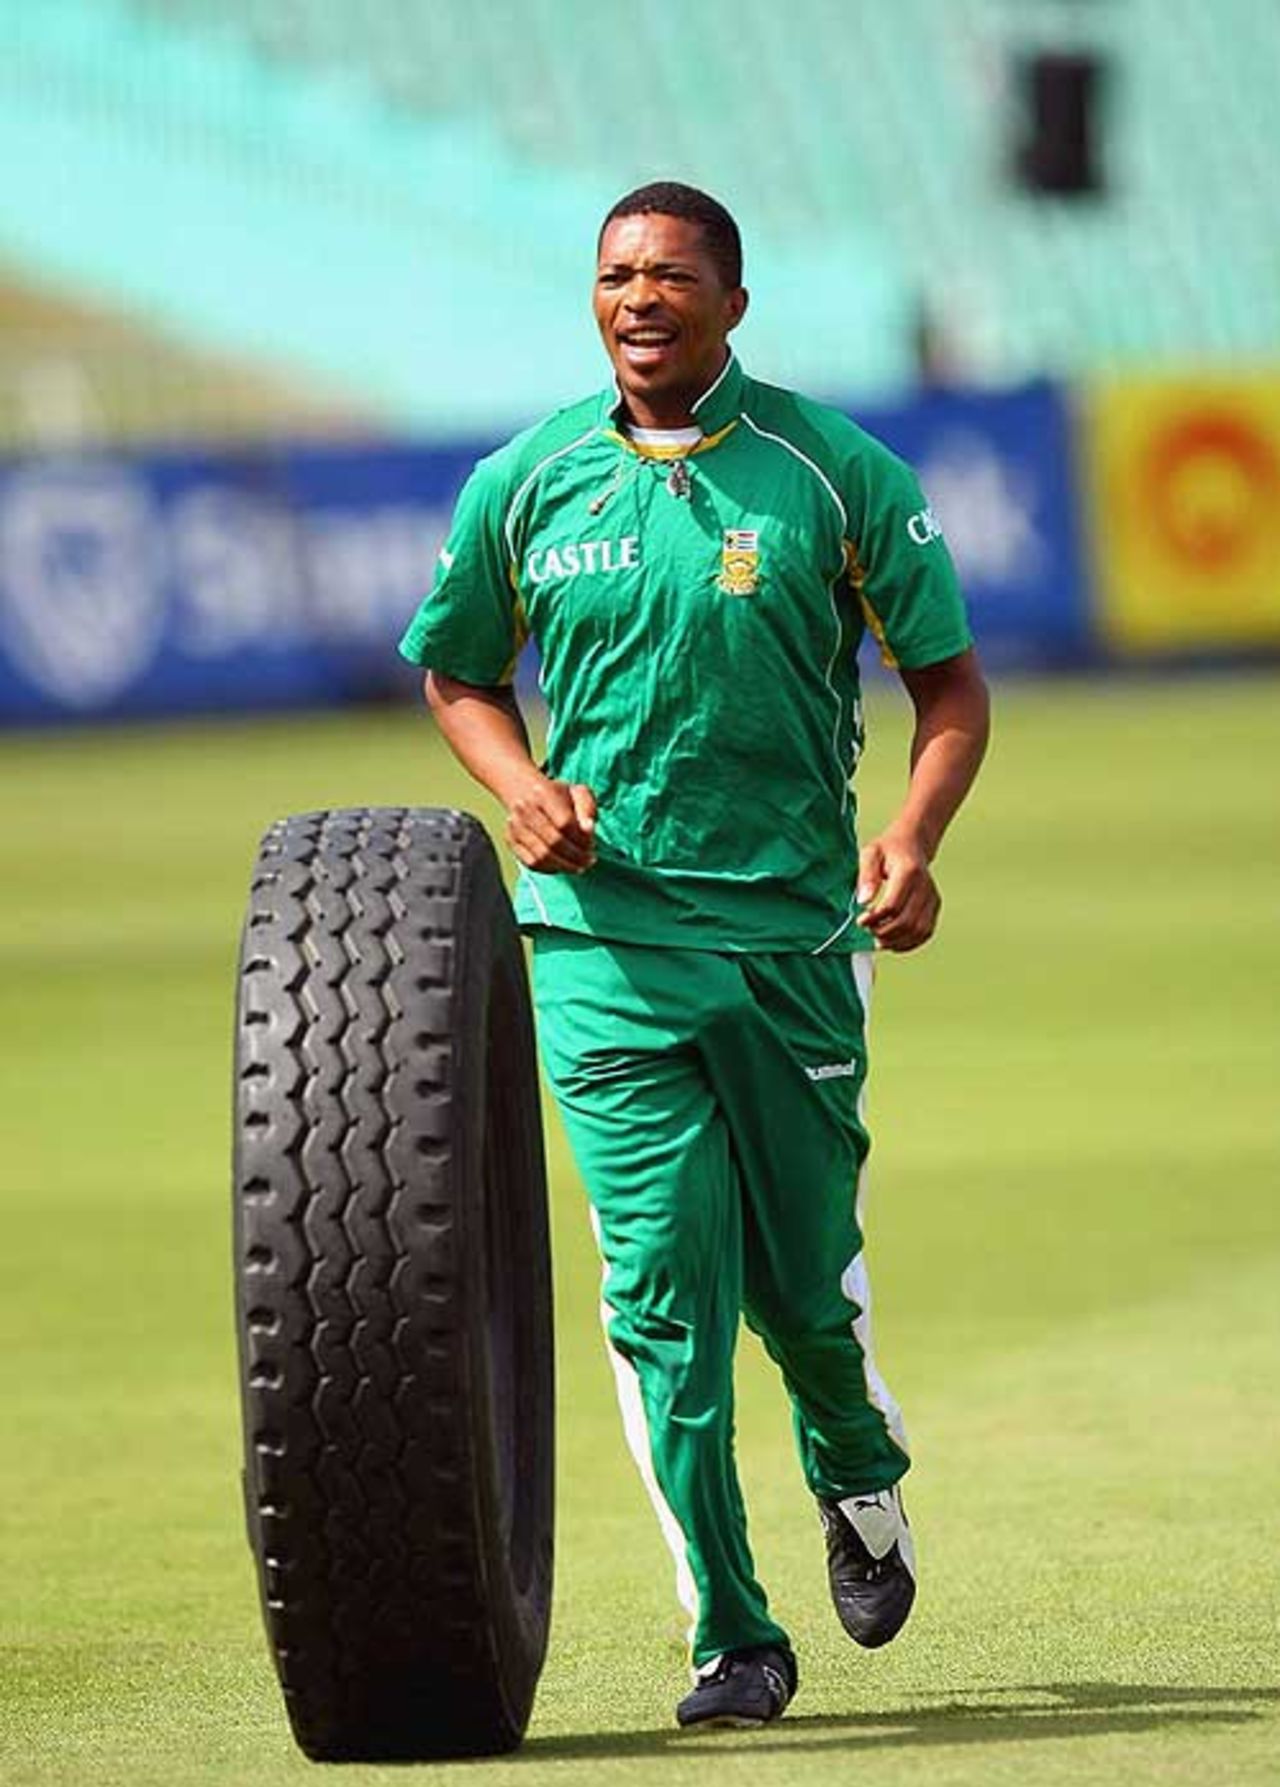 Makhaya Ntini finds a new way to train at Kingsmead, Durban, March 4, 2009